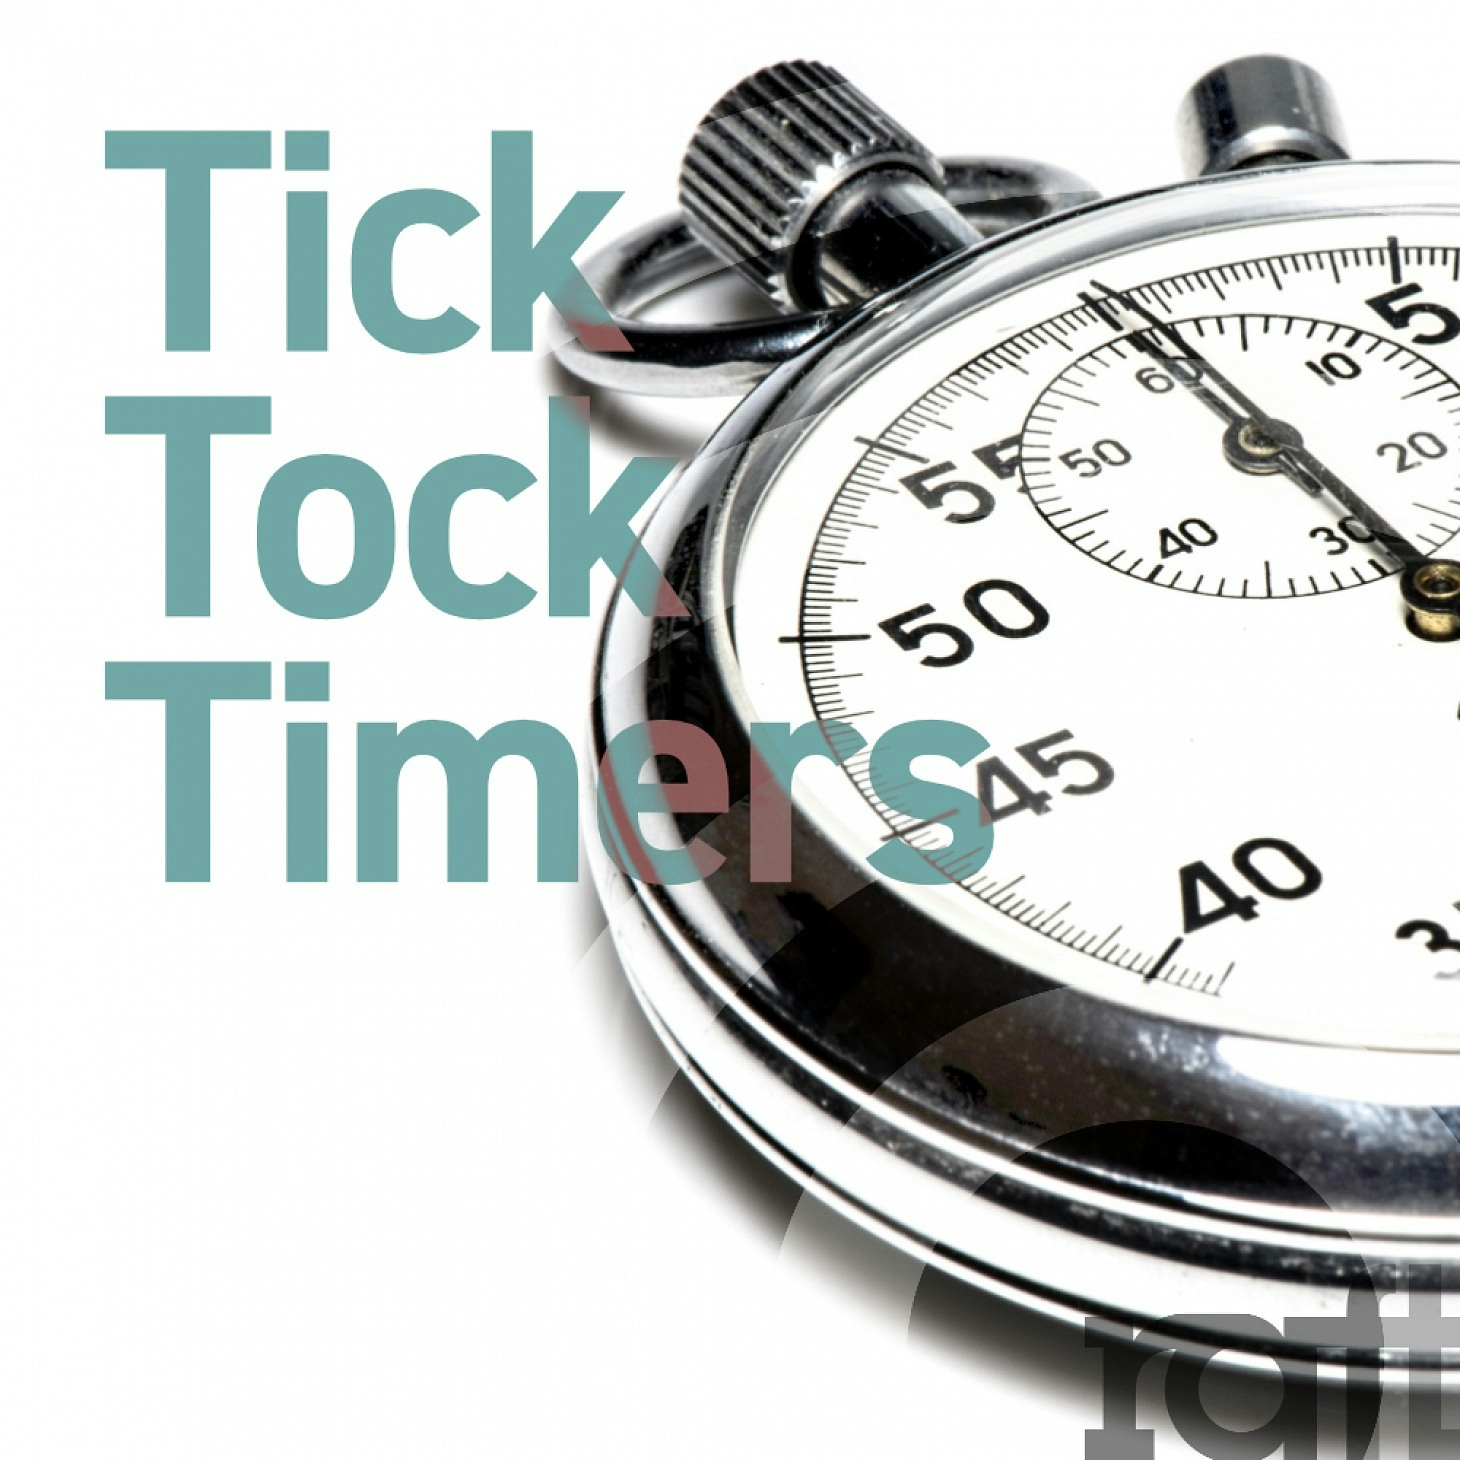 RFT153 Tick Tock Timers